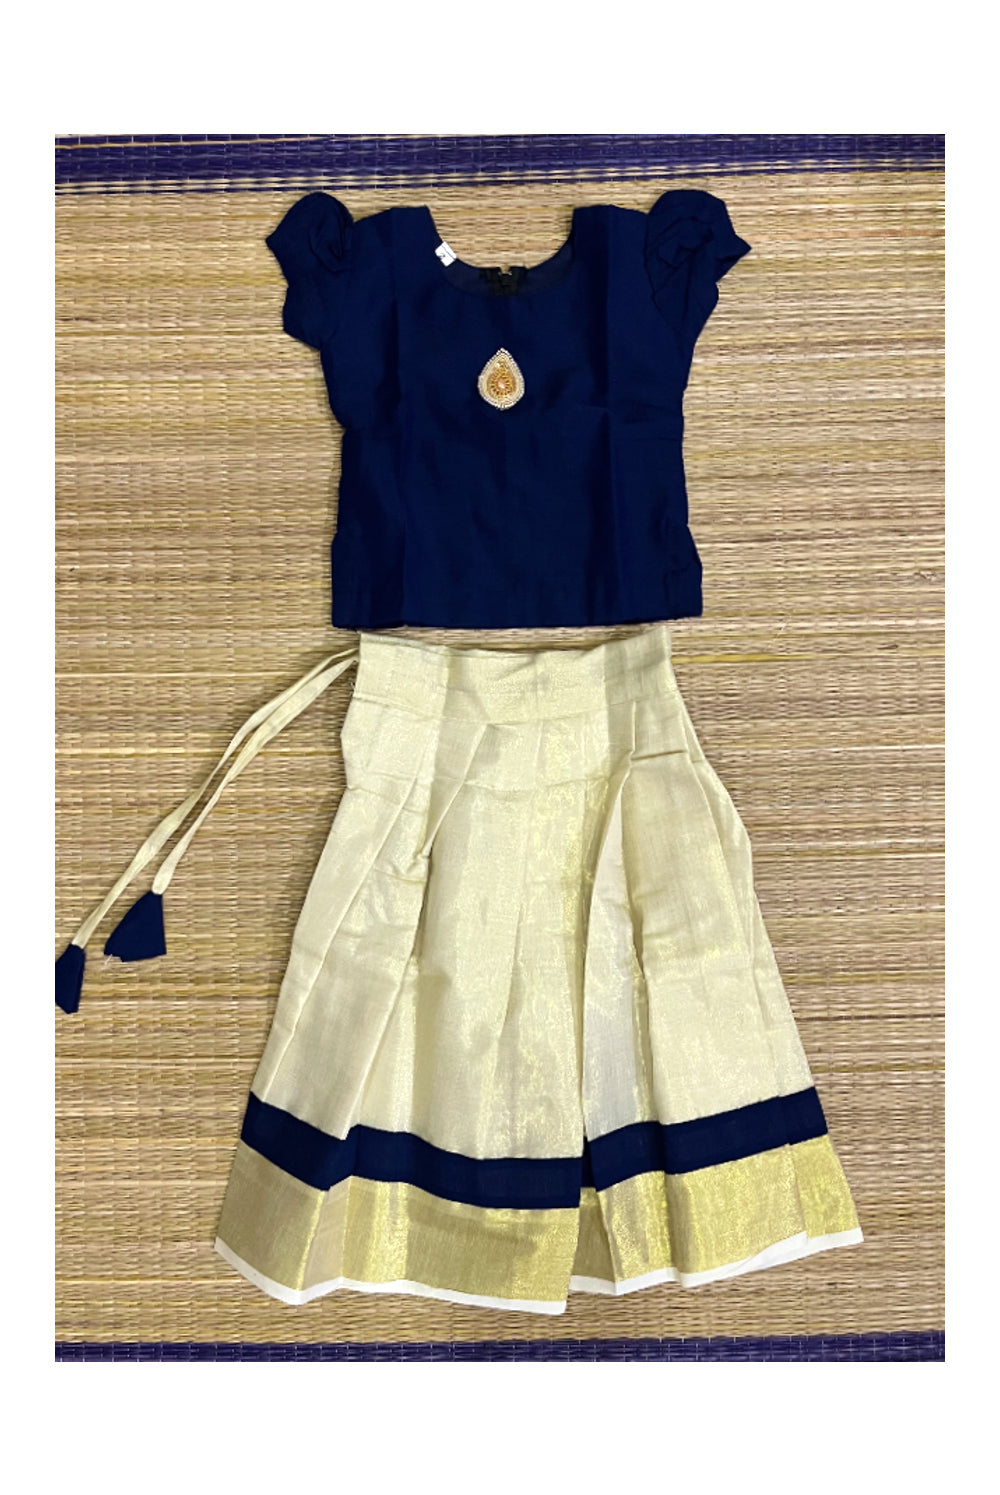 Southloom Kerala Pavada Blouse with Blue Bead Work Design (Age - 1 Year)